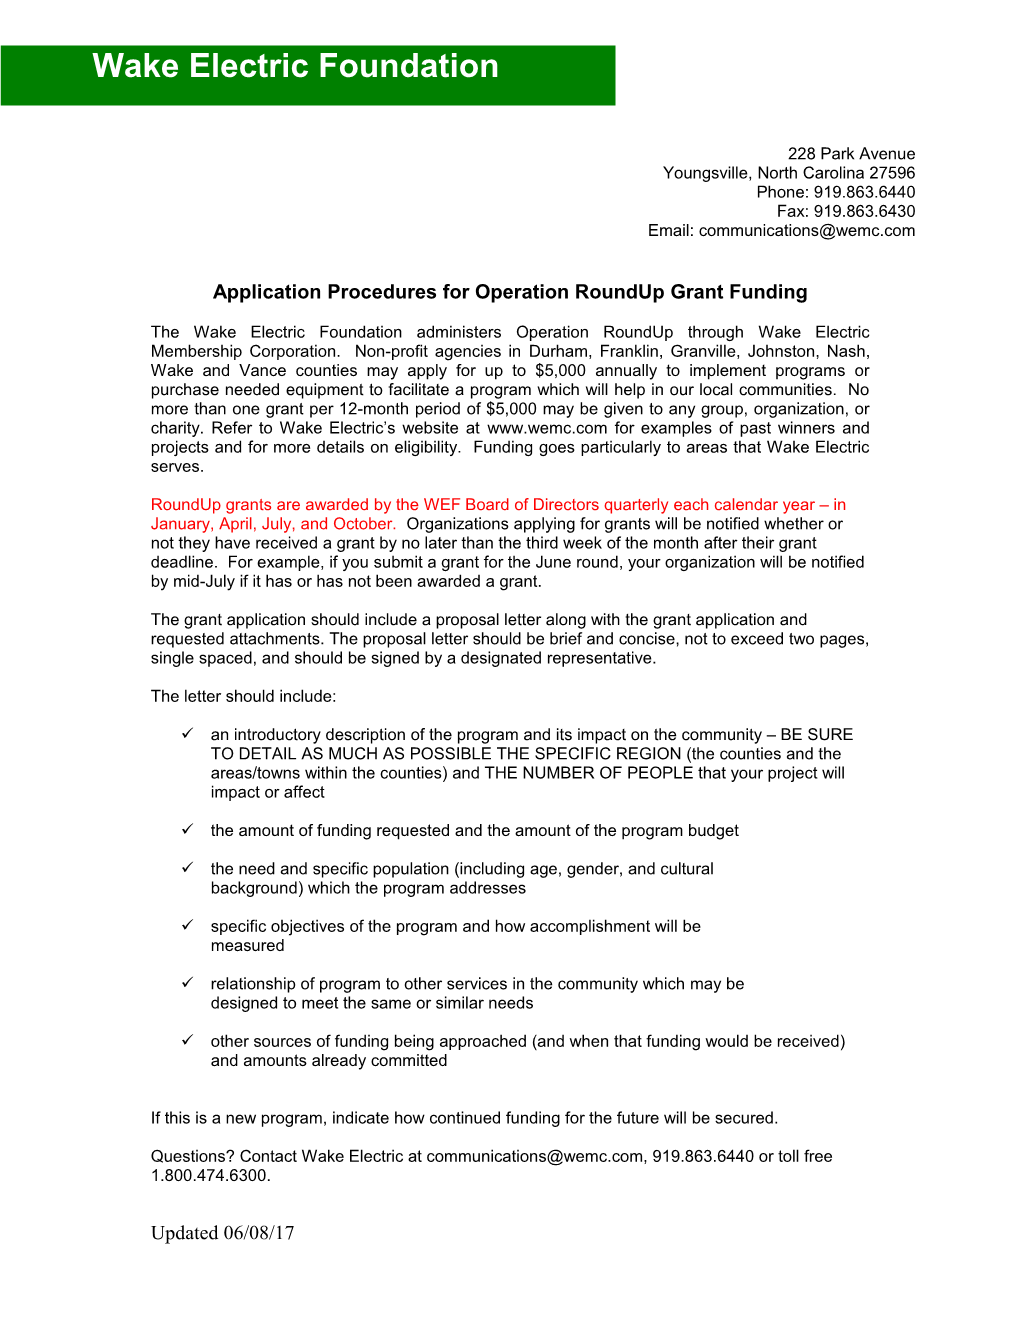 Application Procedures for Operation Roundup Grant Funding